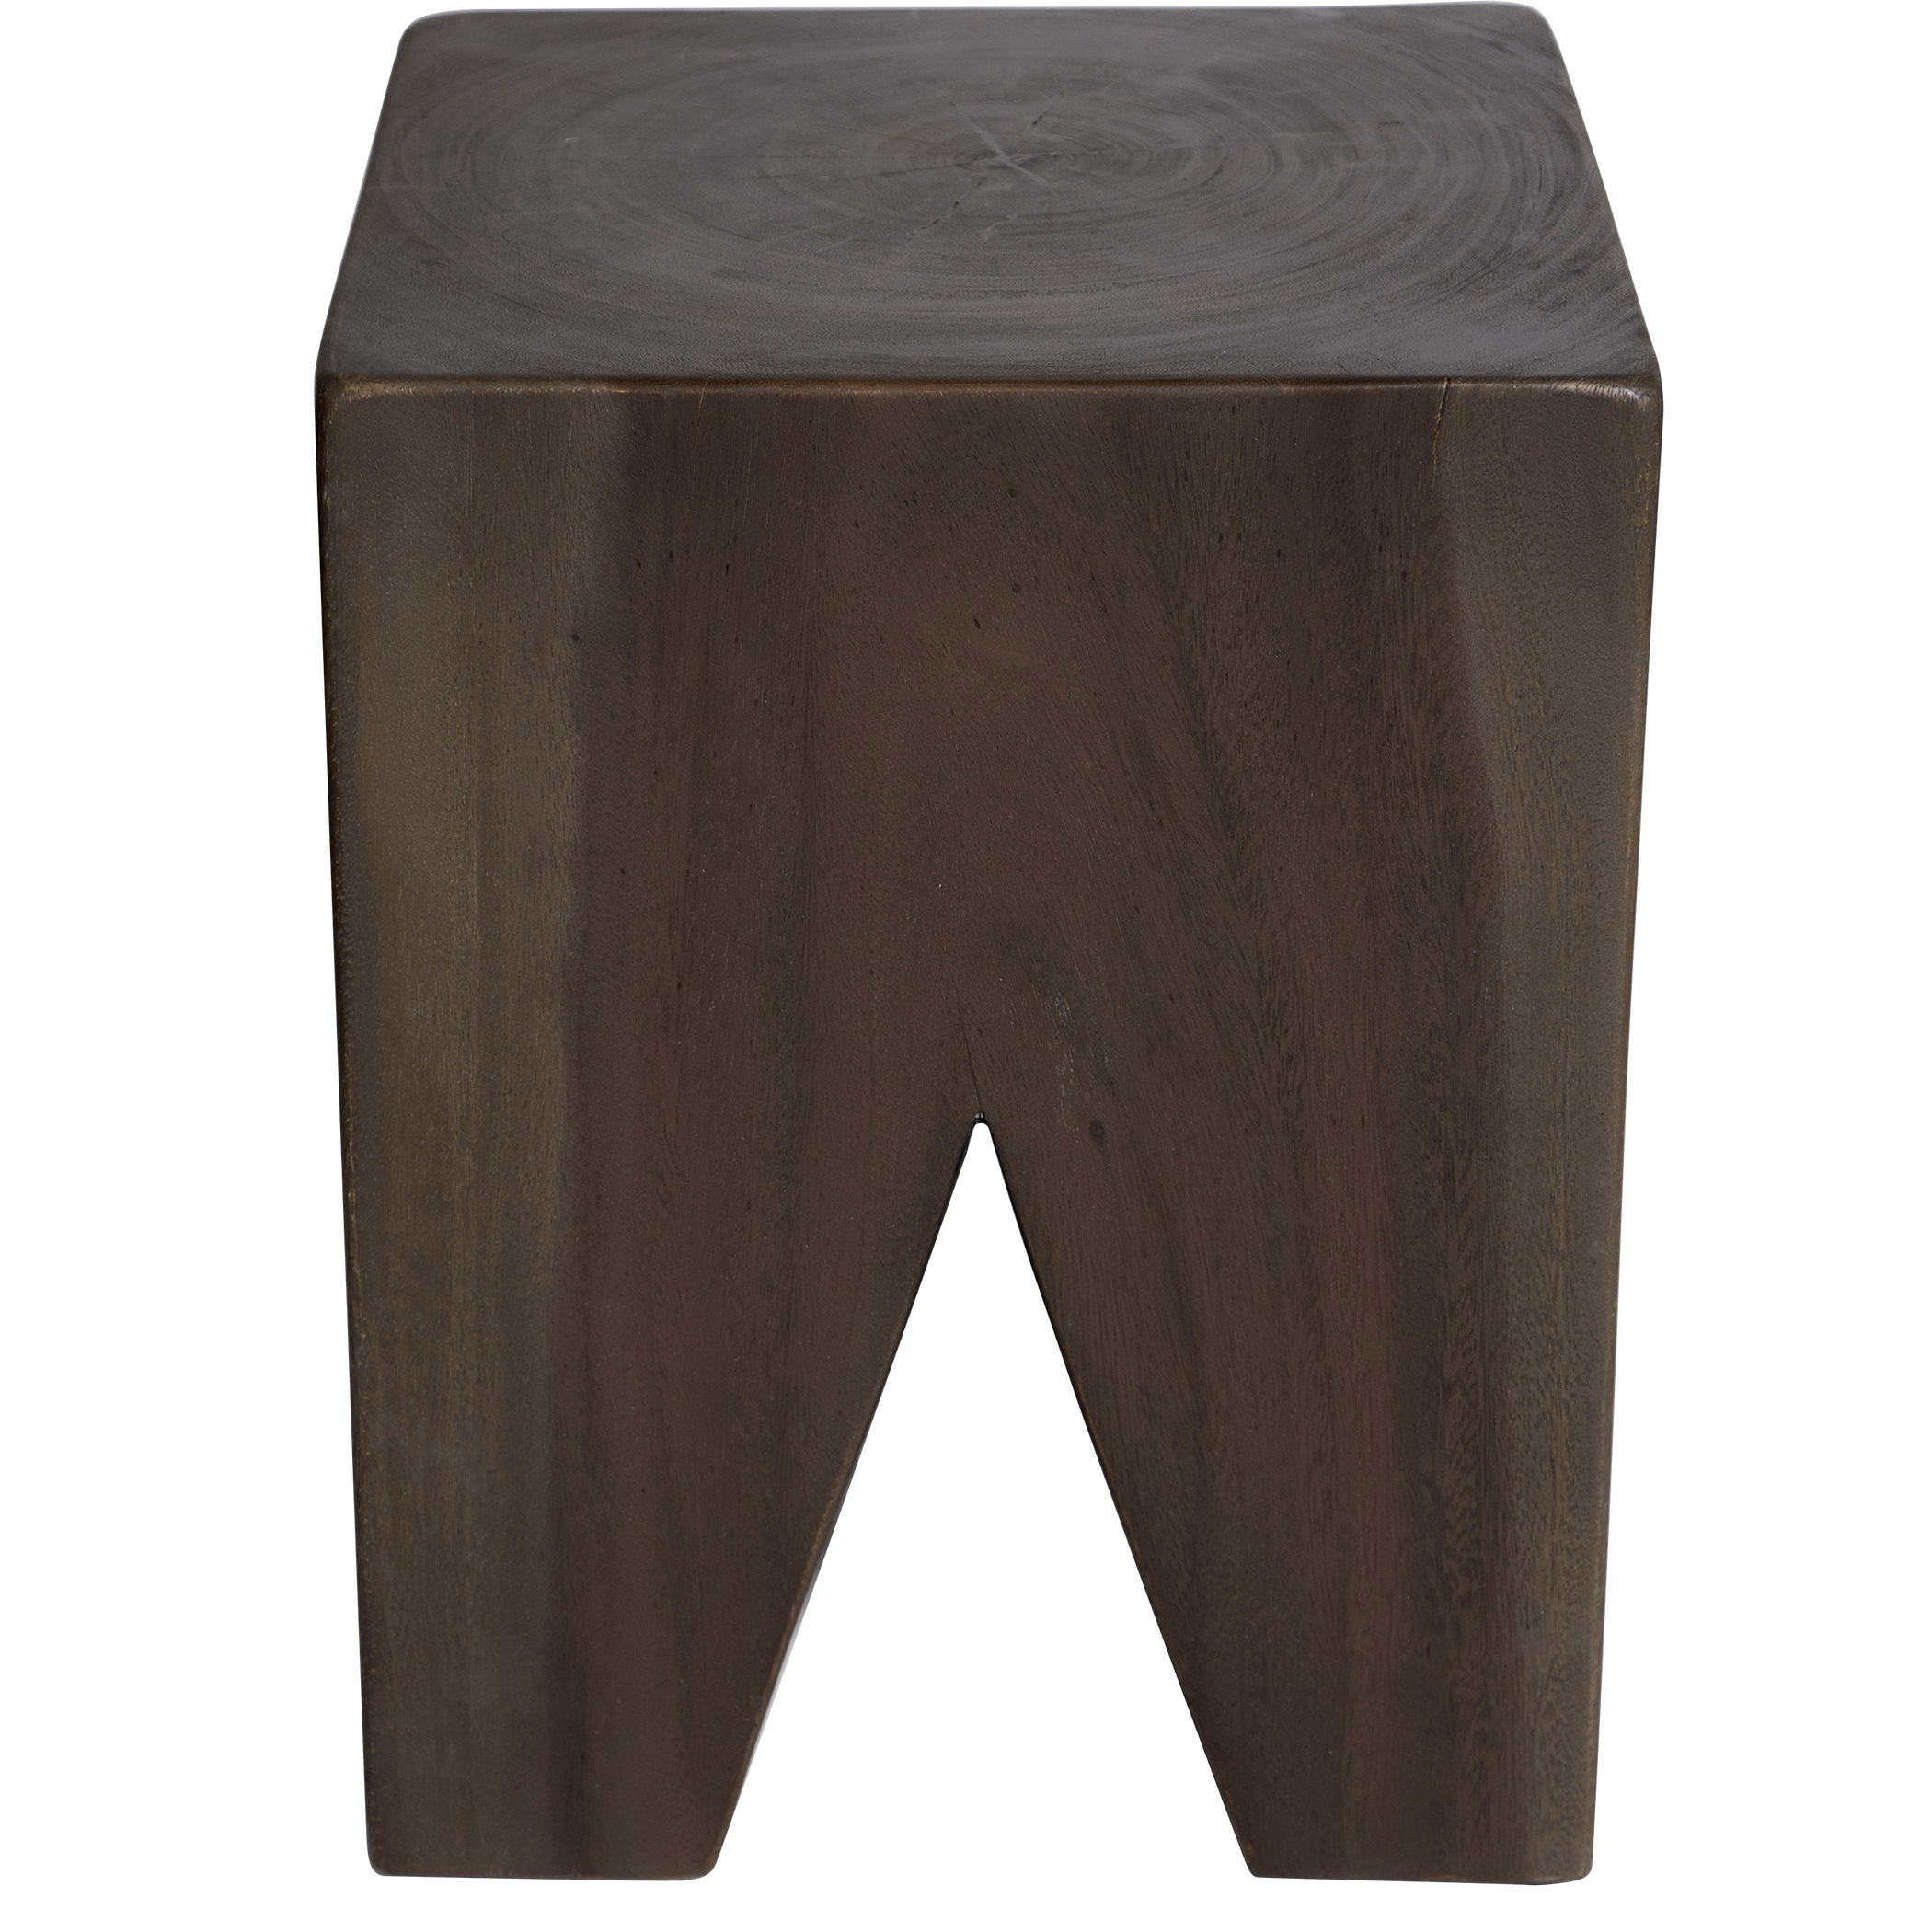 Armin - Solid Wood Accent Stool - Dark Brown